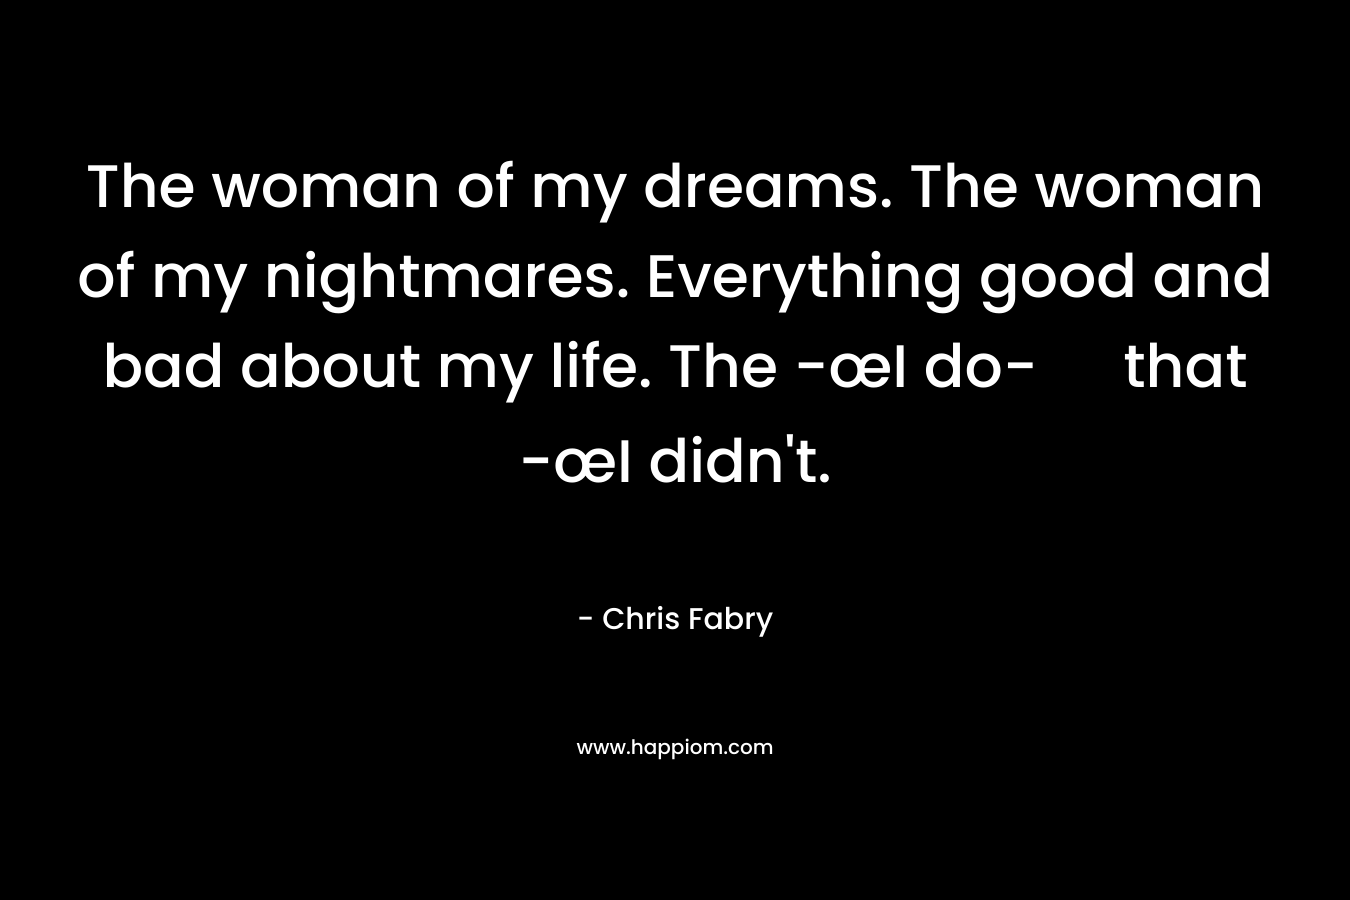 The woman of my dreams. The woman of my nightmares. Everything good and bad about my life. The -œI do- that -œI didn’t. – Chris Fabry